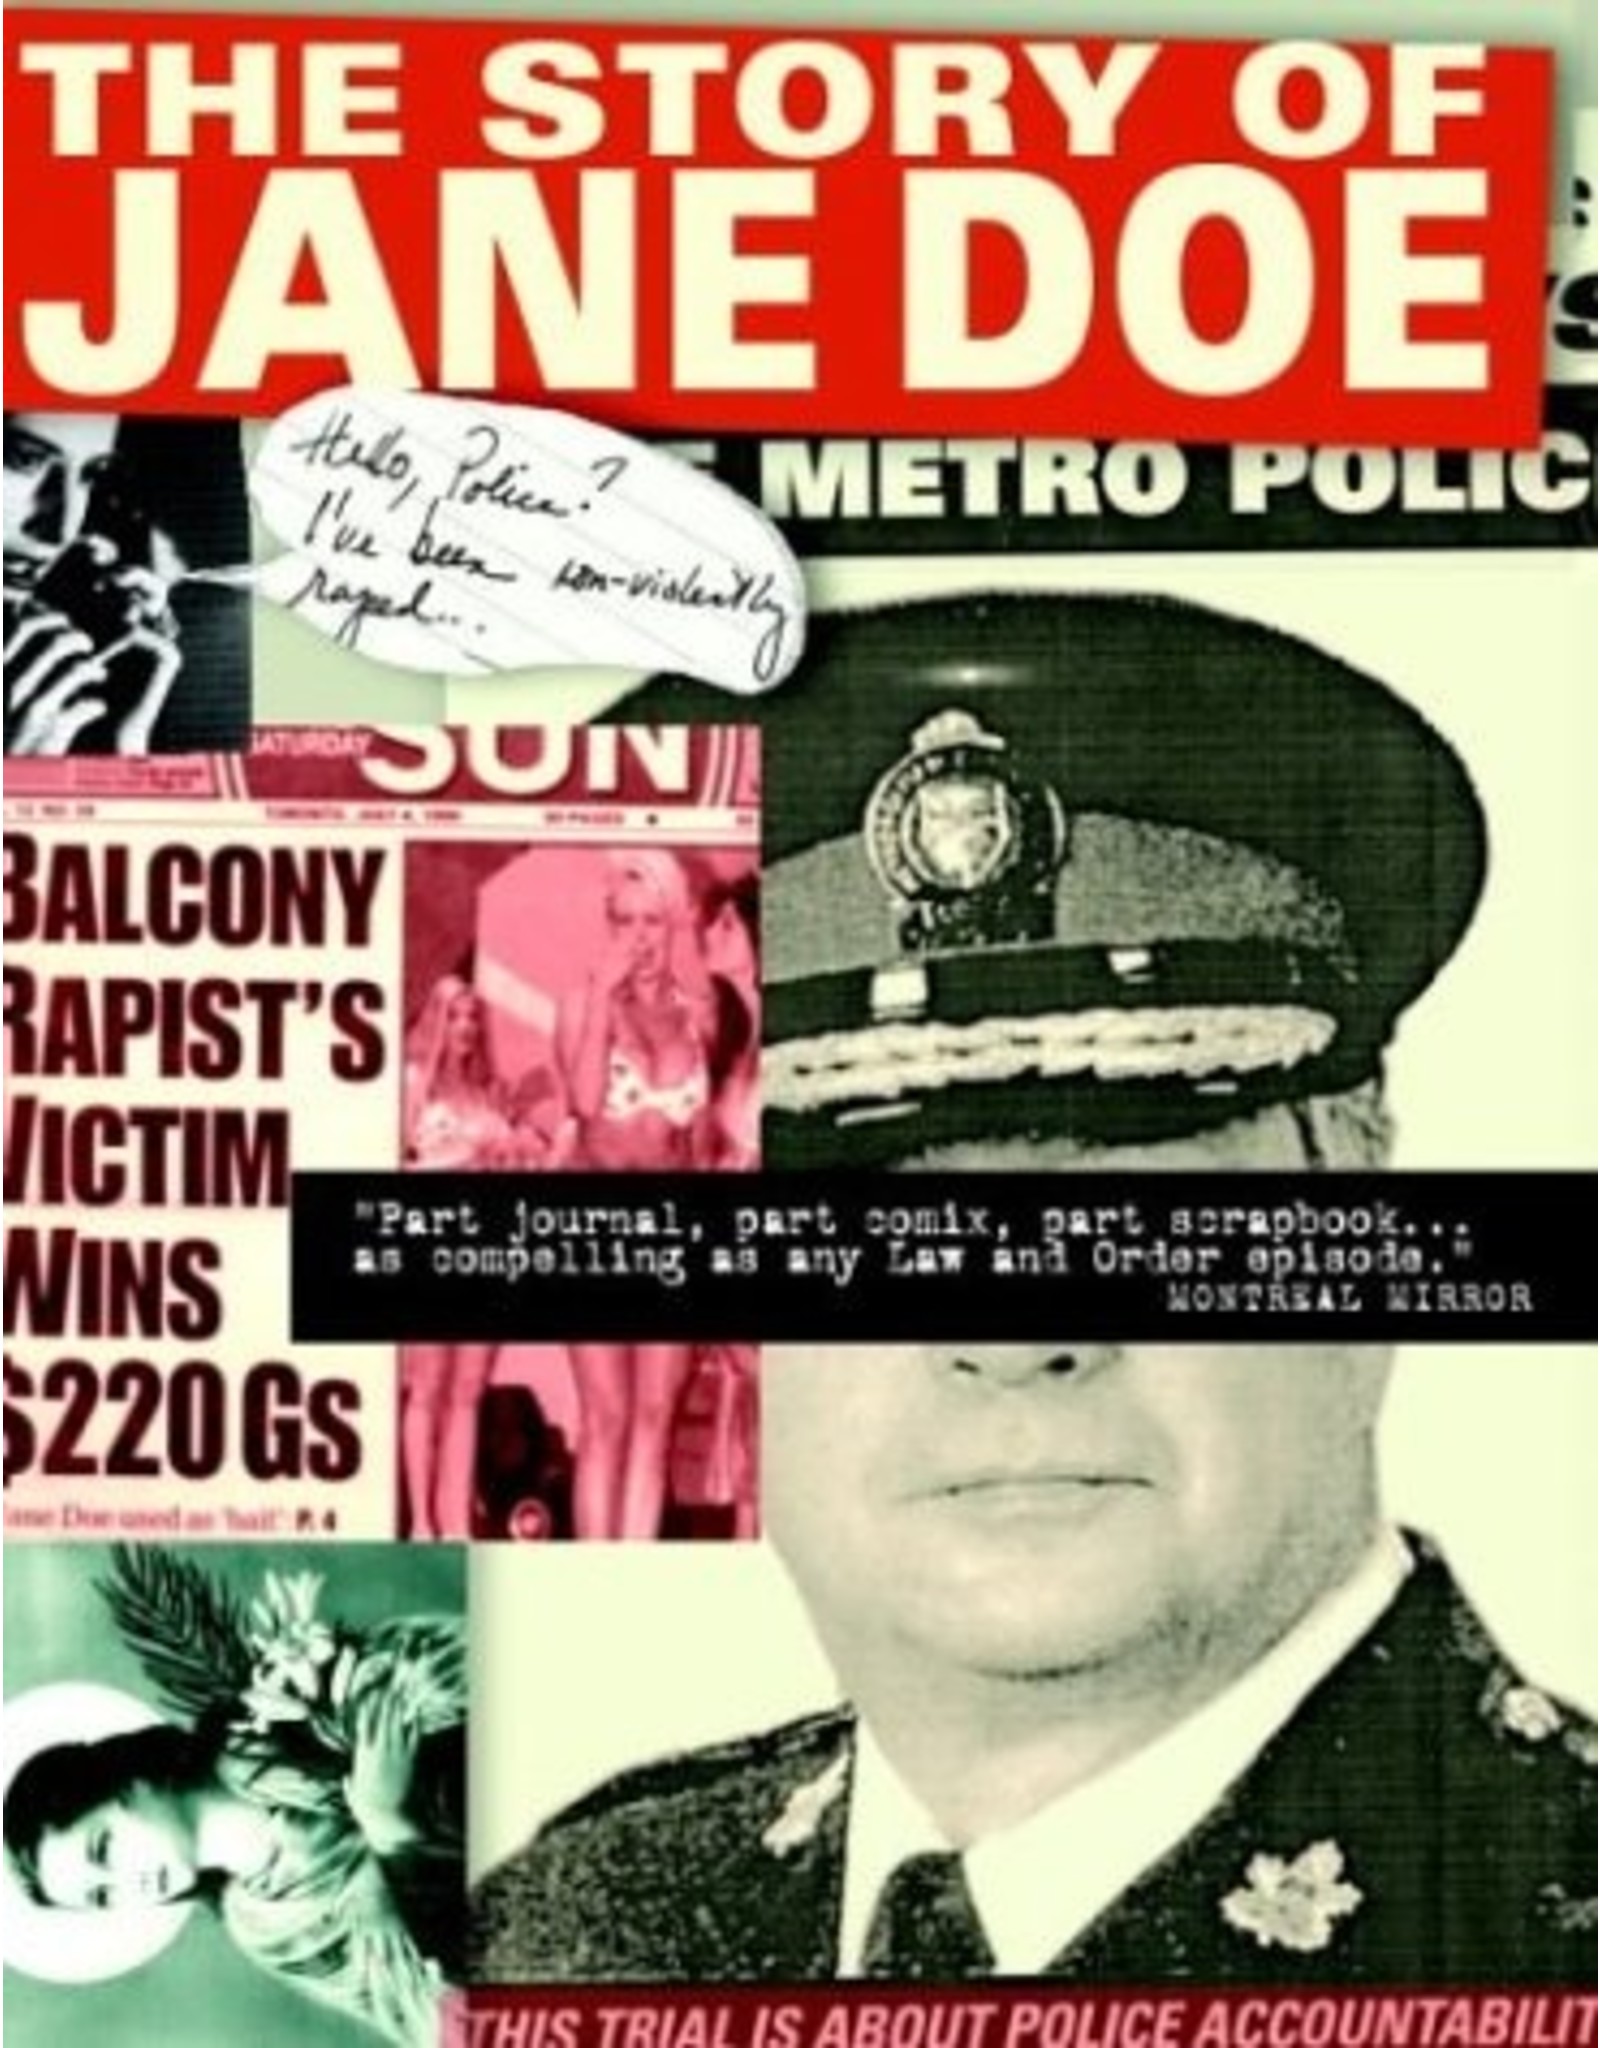 Literature The Story of Jane Doe: A Book About Rape